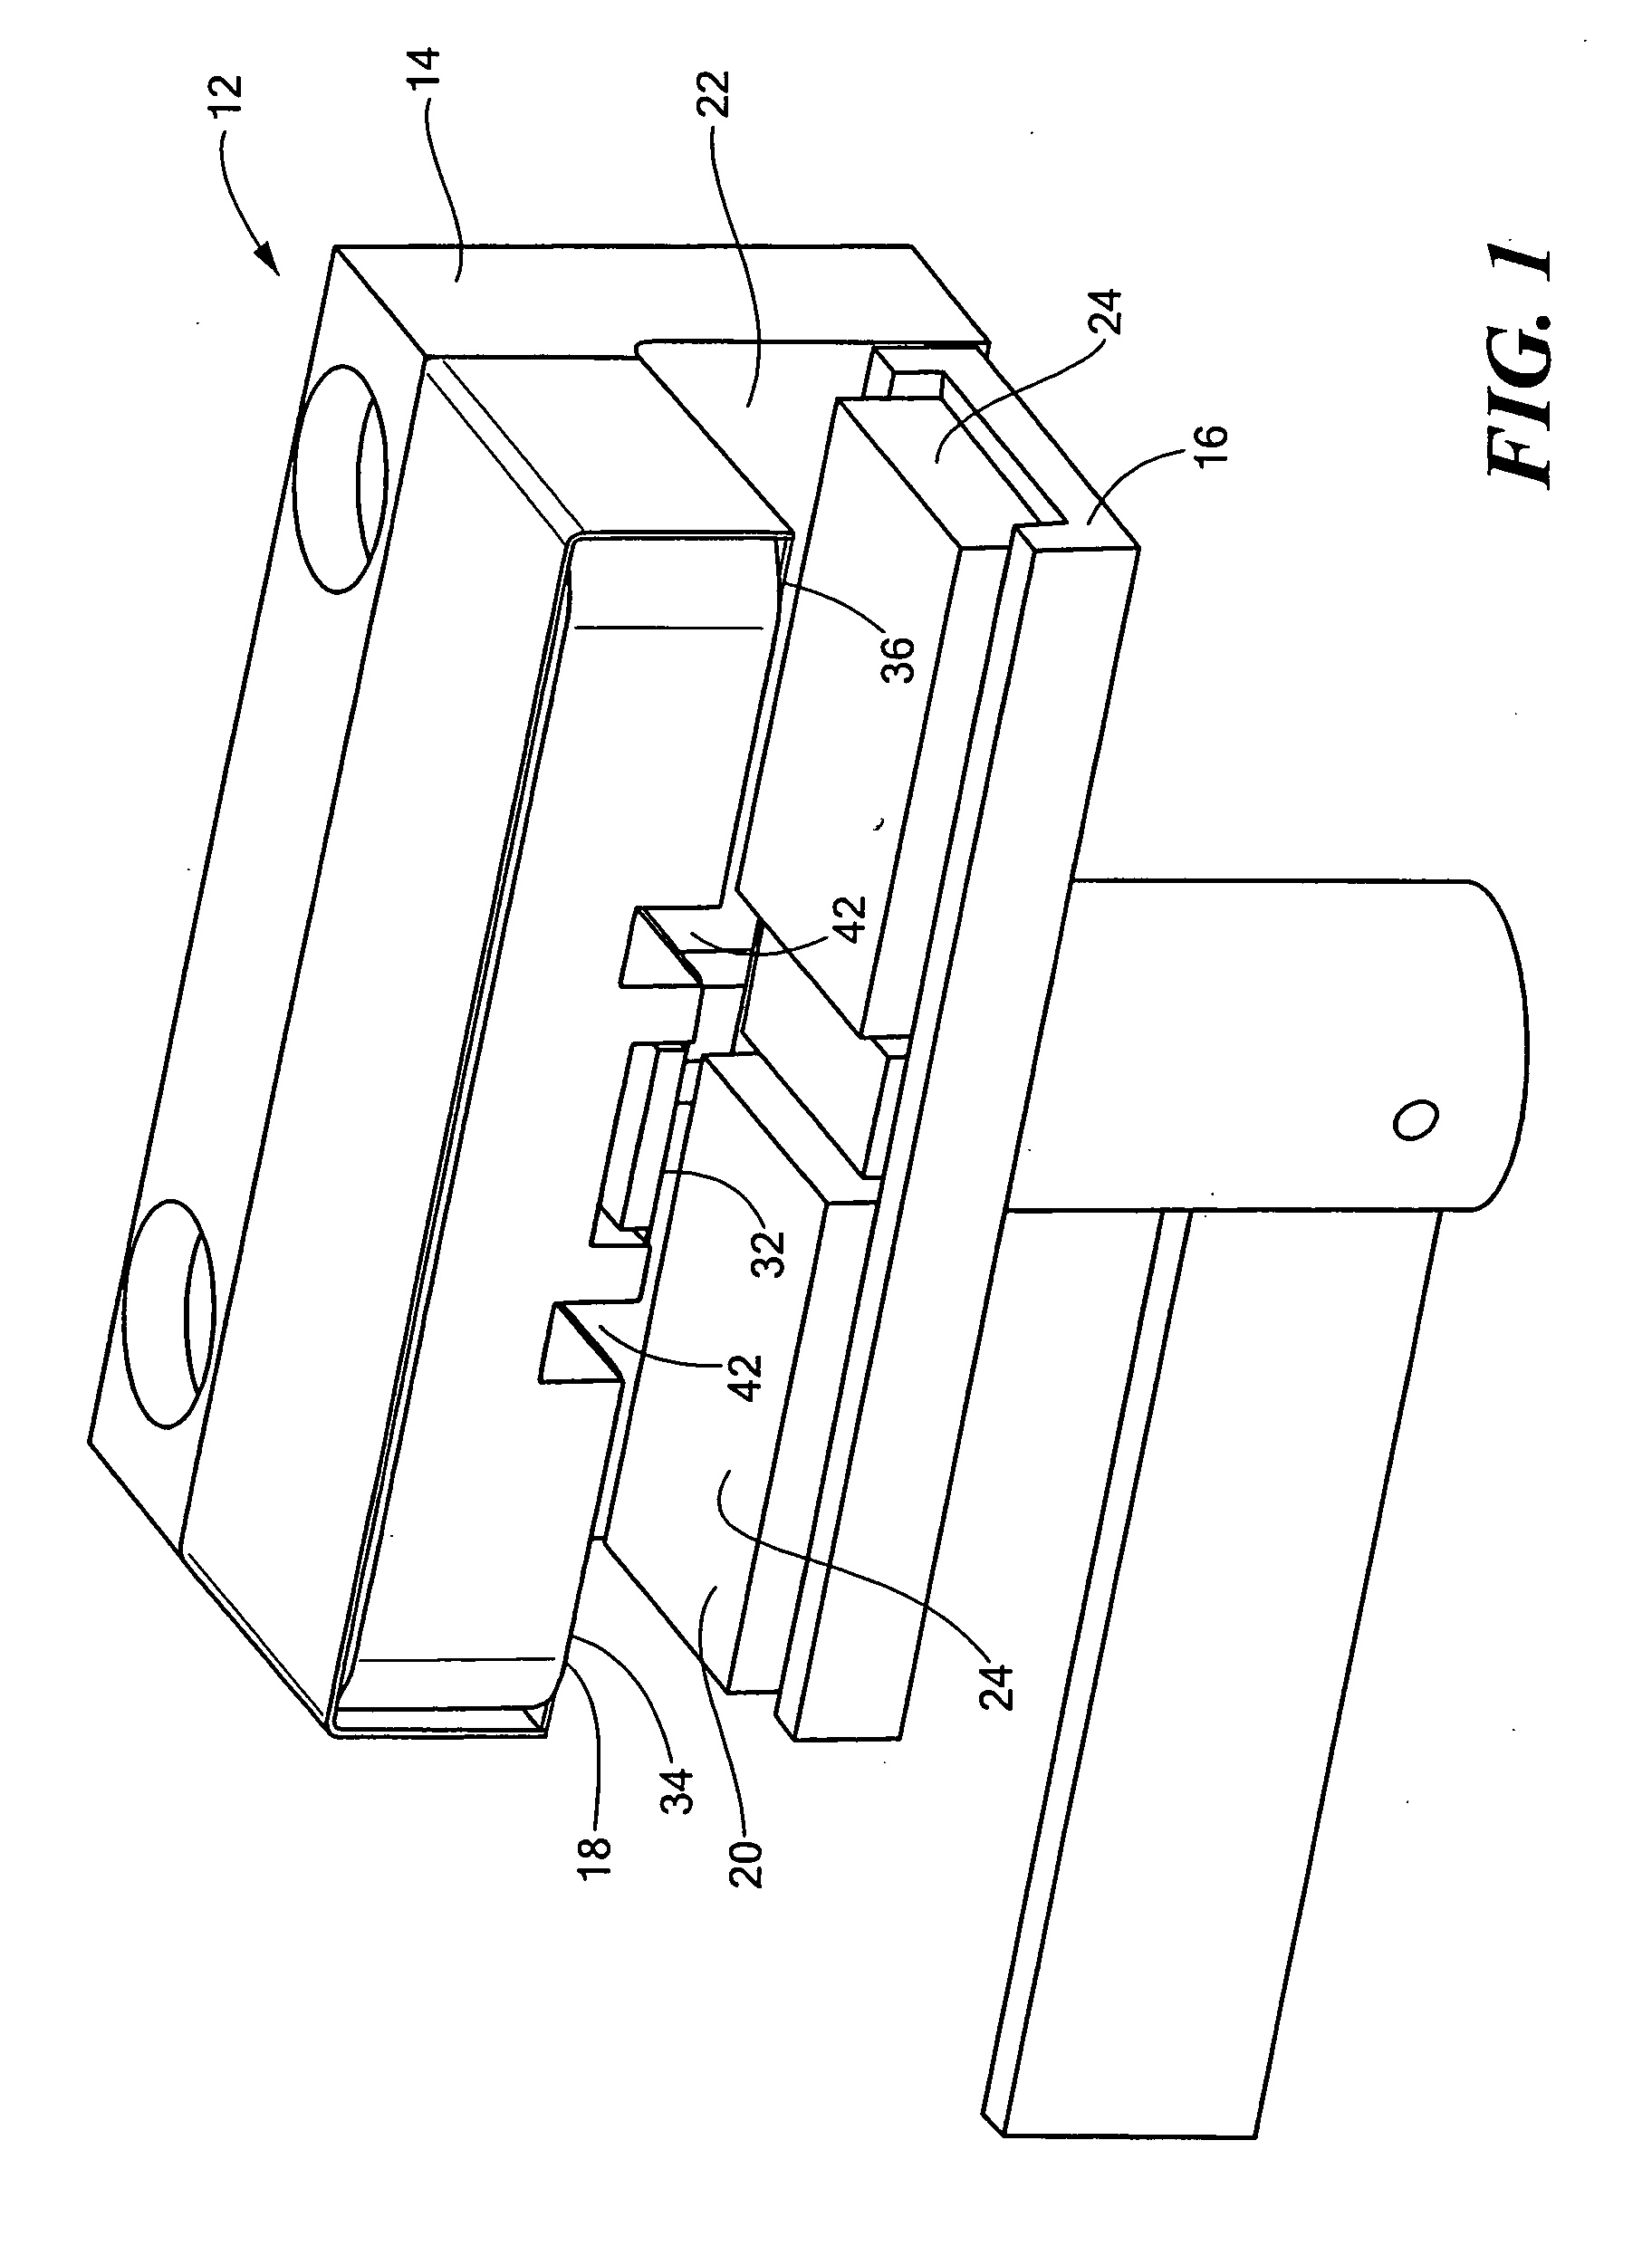 Gas removal in an intravenous fluid delivery system